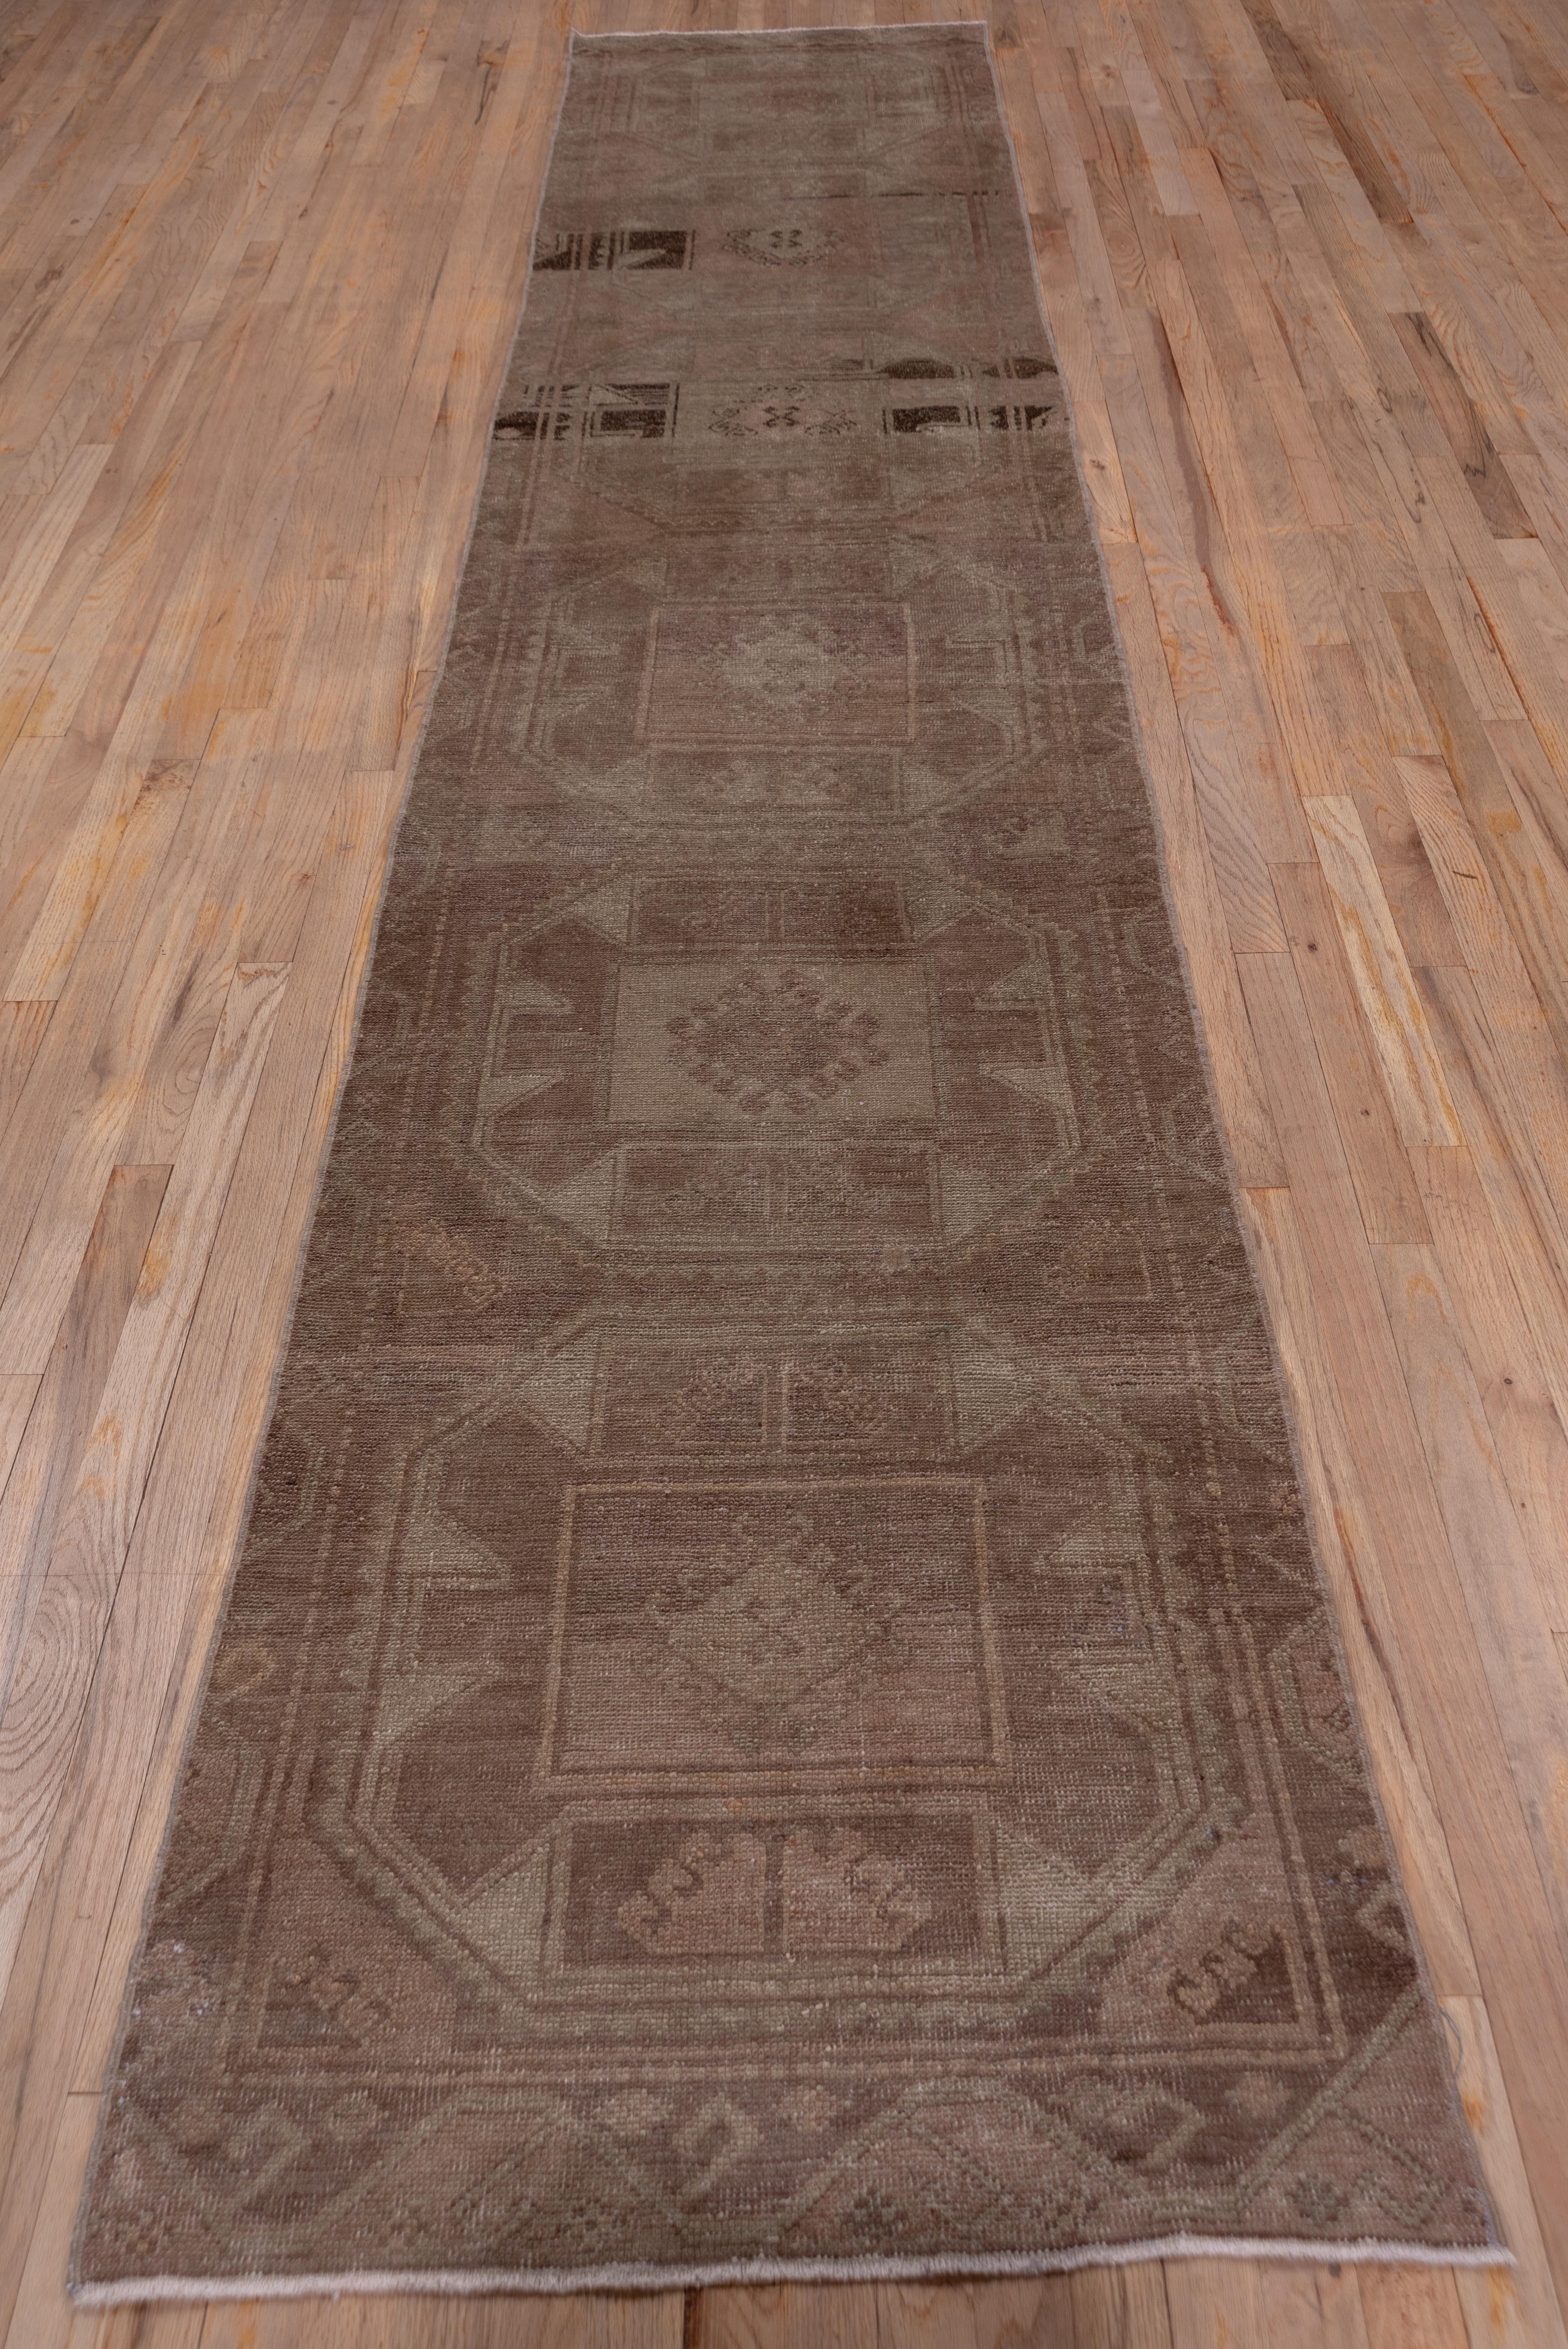 This tone-on-tone eastern Anatolian runner shows a medium brown field closely covered with six octagonal medallions in beige and brown. Dark brown abrash across the entire rug is quite noticeable.